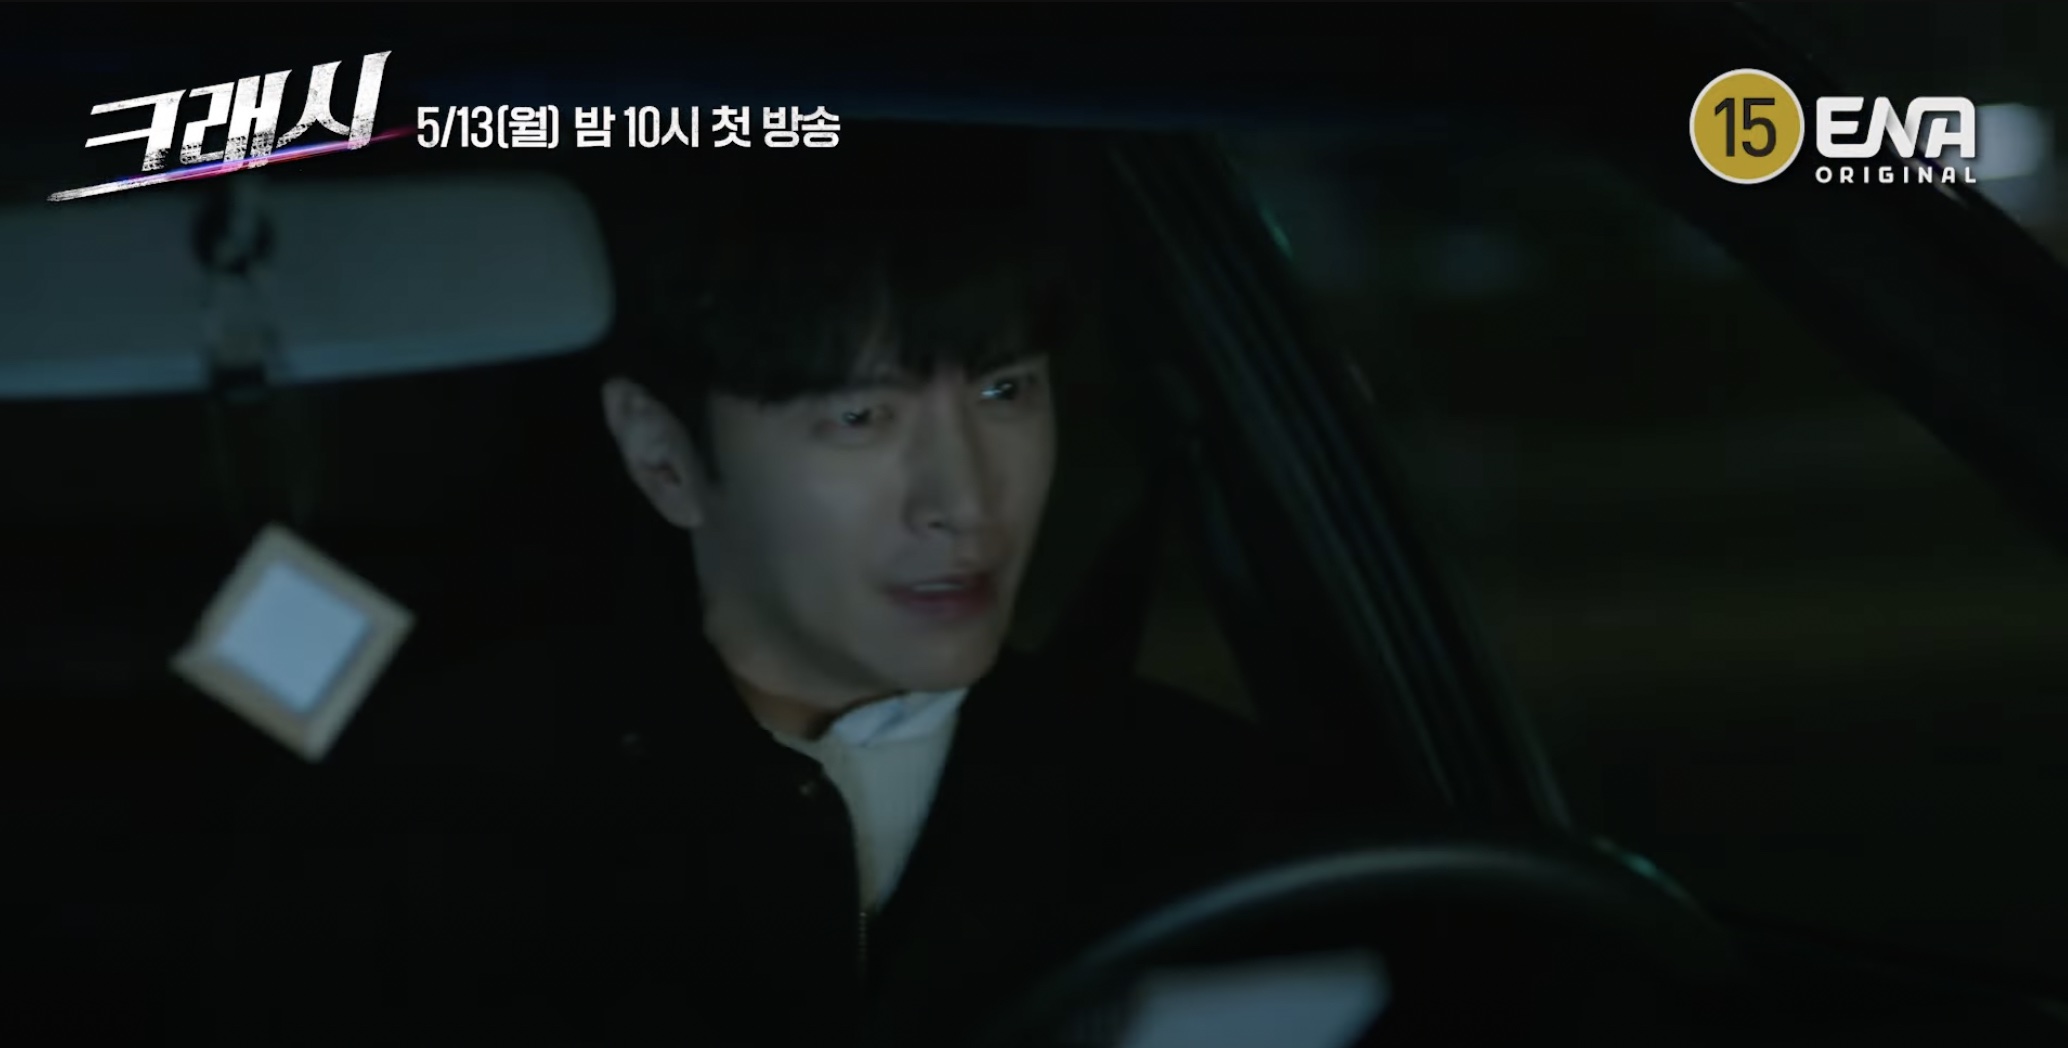 Lee Min-ki tries to do anything but Crash in new teaser